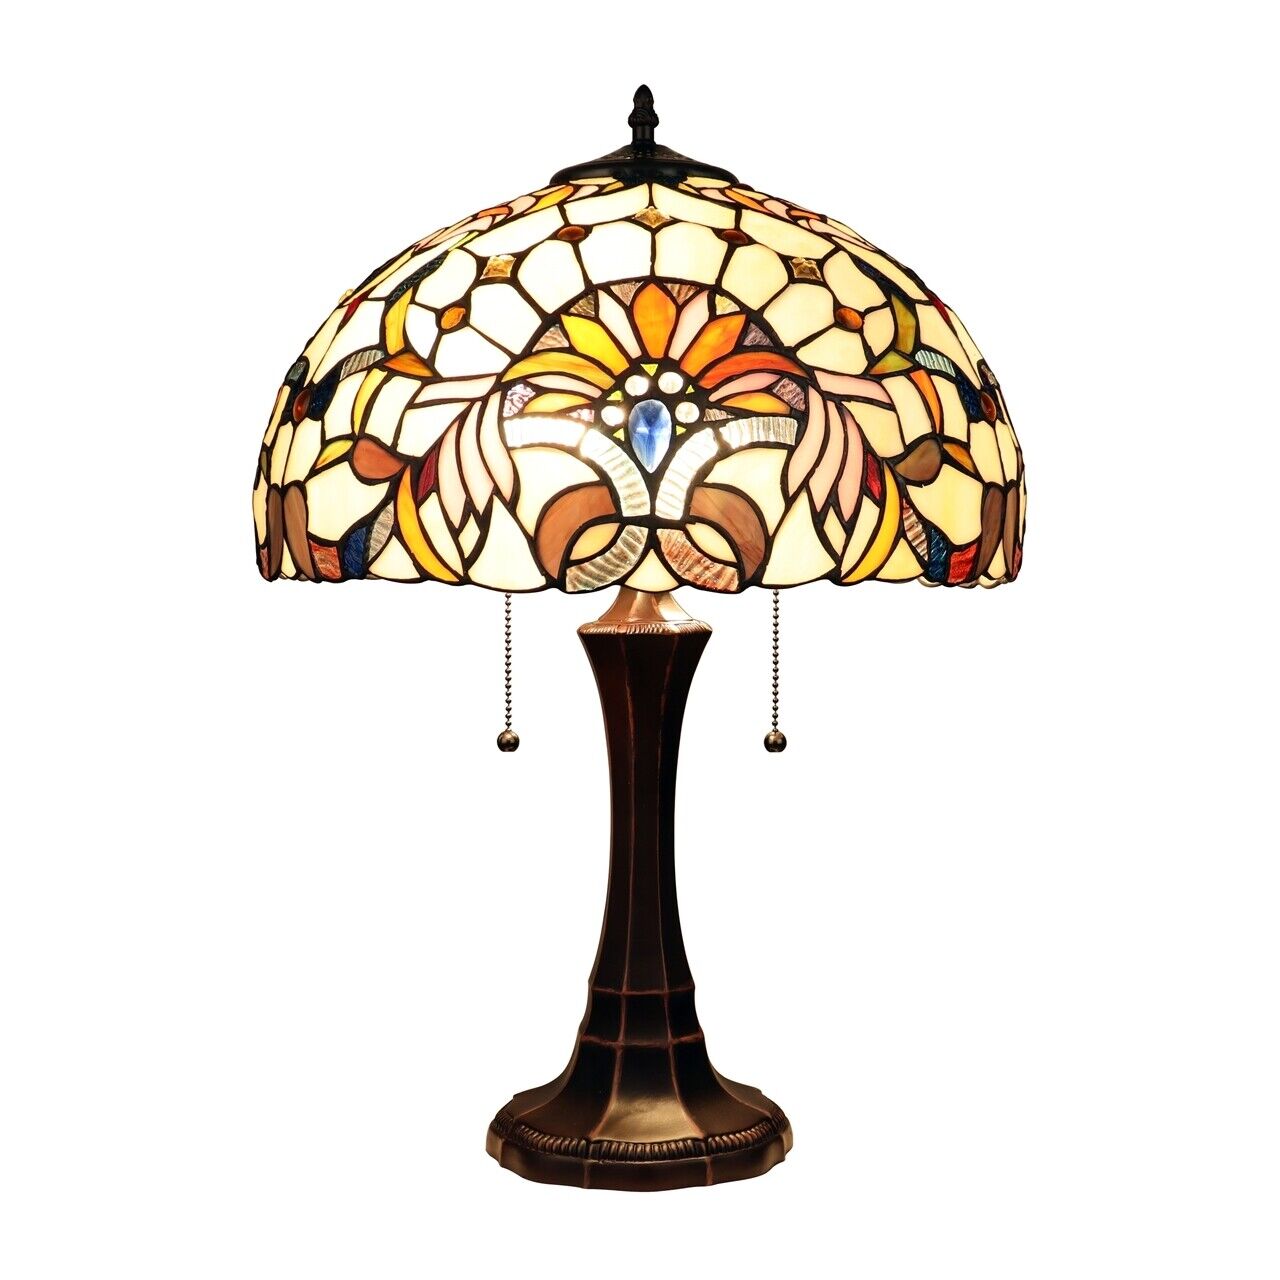 22.8" Antique Vintage Style Stained Glass Table Lamp